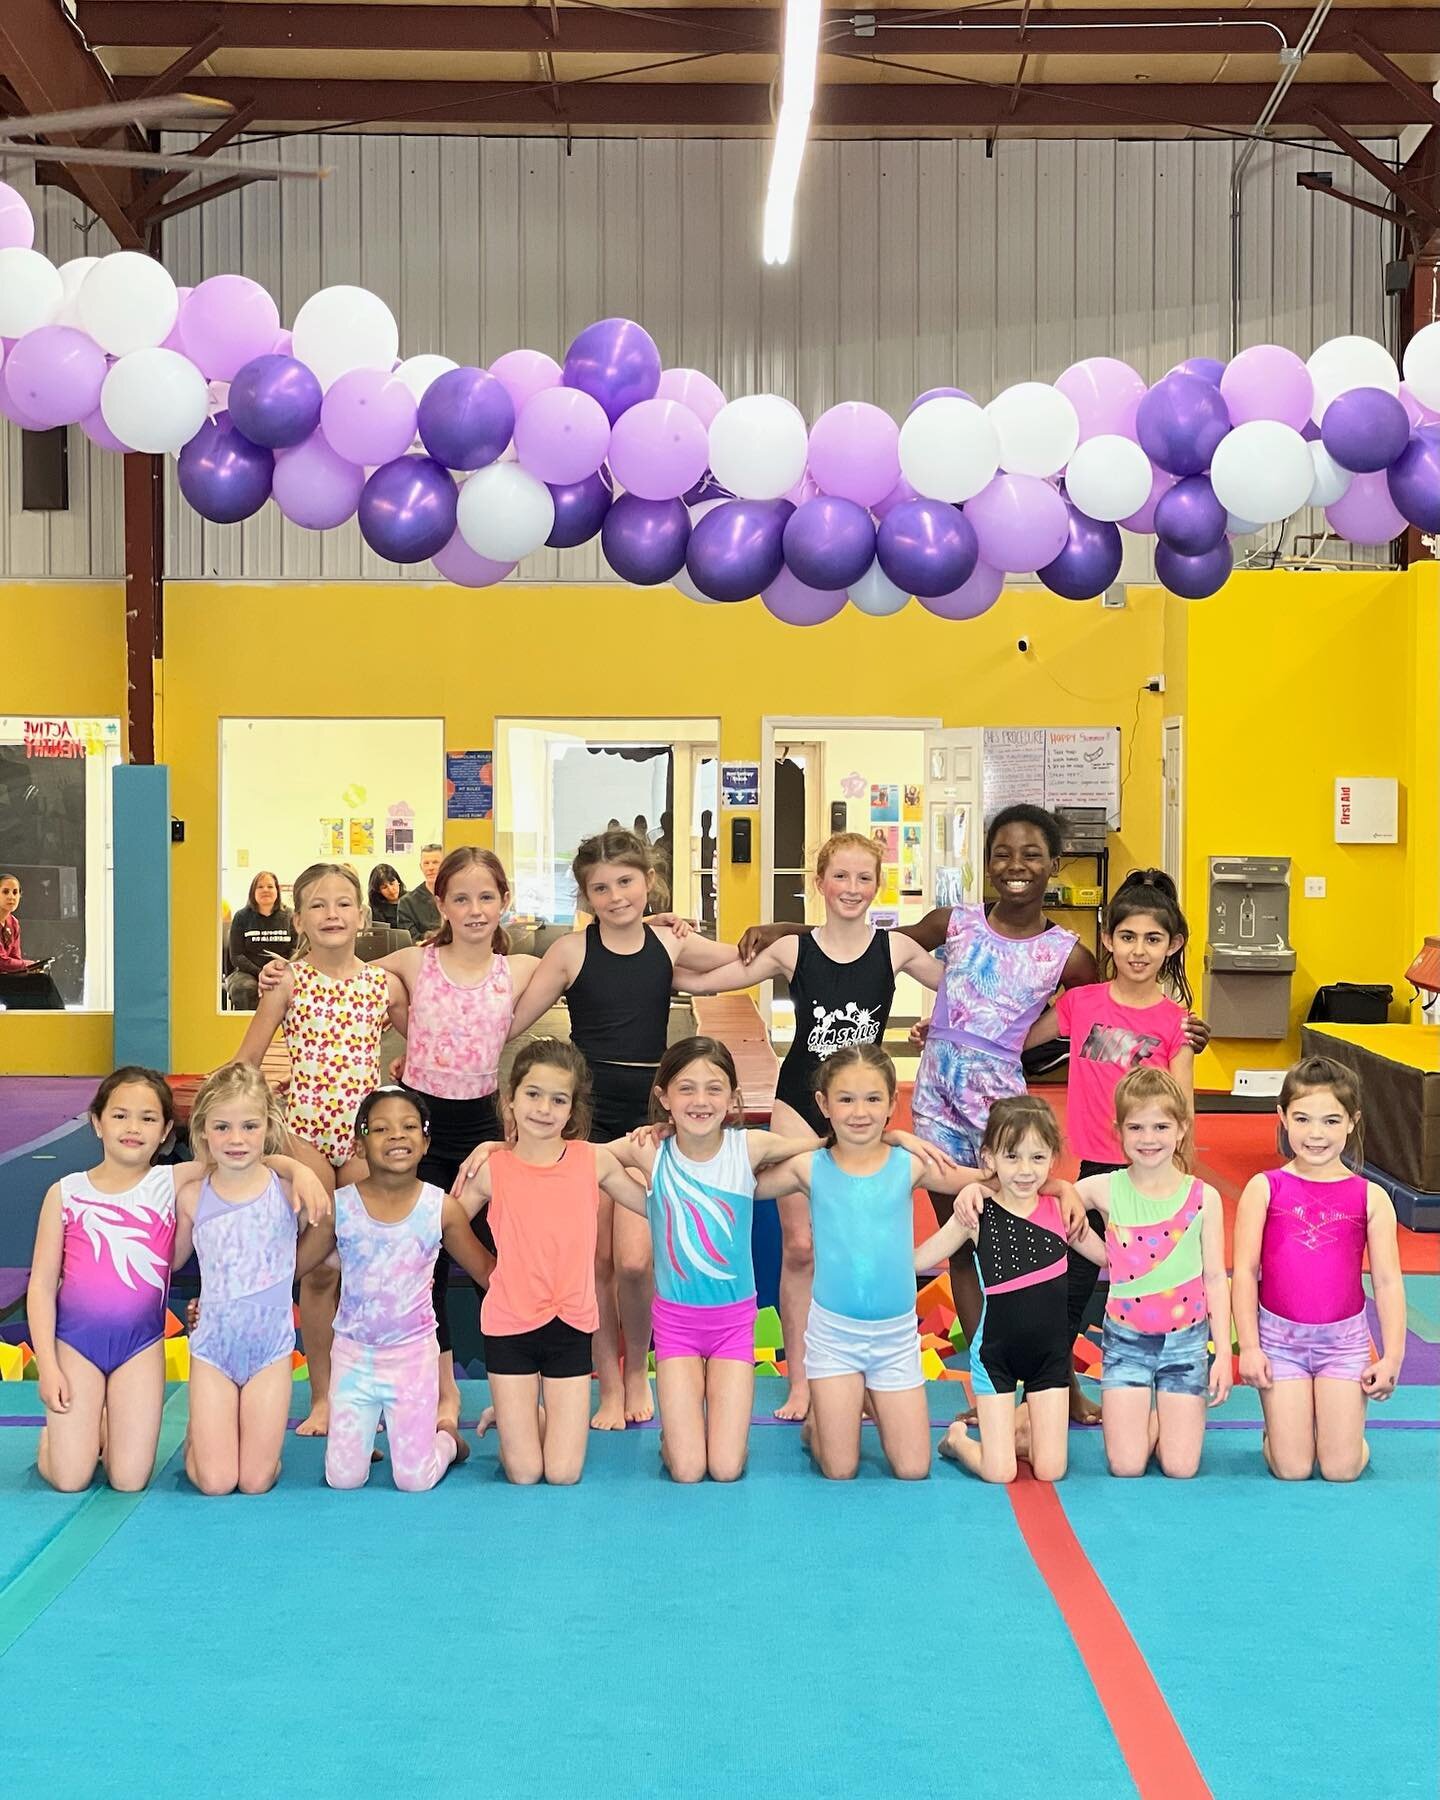 💜GSE💜
We are so proud of these girls for rocking try outs and working so hard in their first 2 weeks of GSE practice! 
😊We are so excited to welcome our new friends and to get to work this season 💪

🤸&zwj;♀️Check out some drills our Level 3 and 